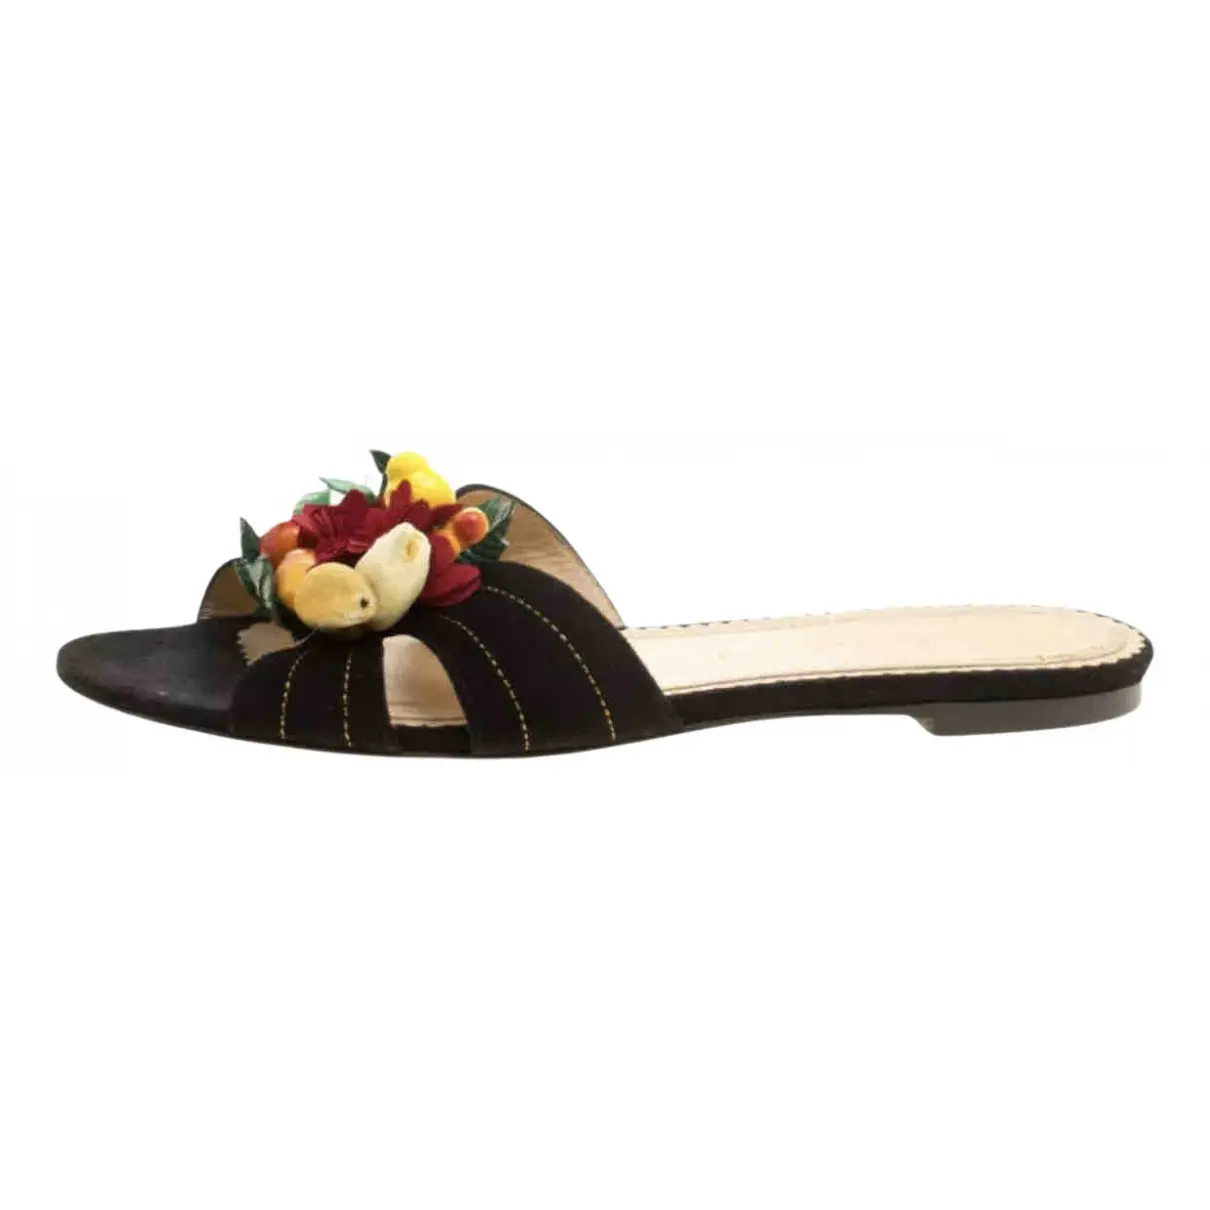 Buy Charlotte Olympia Mules online